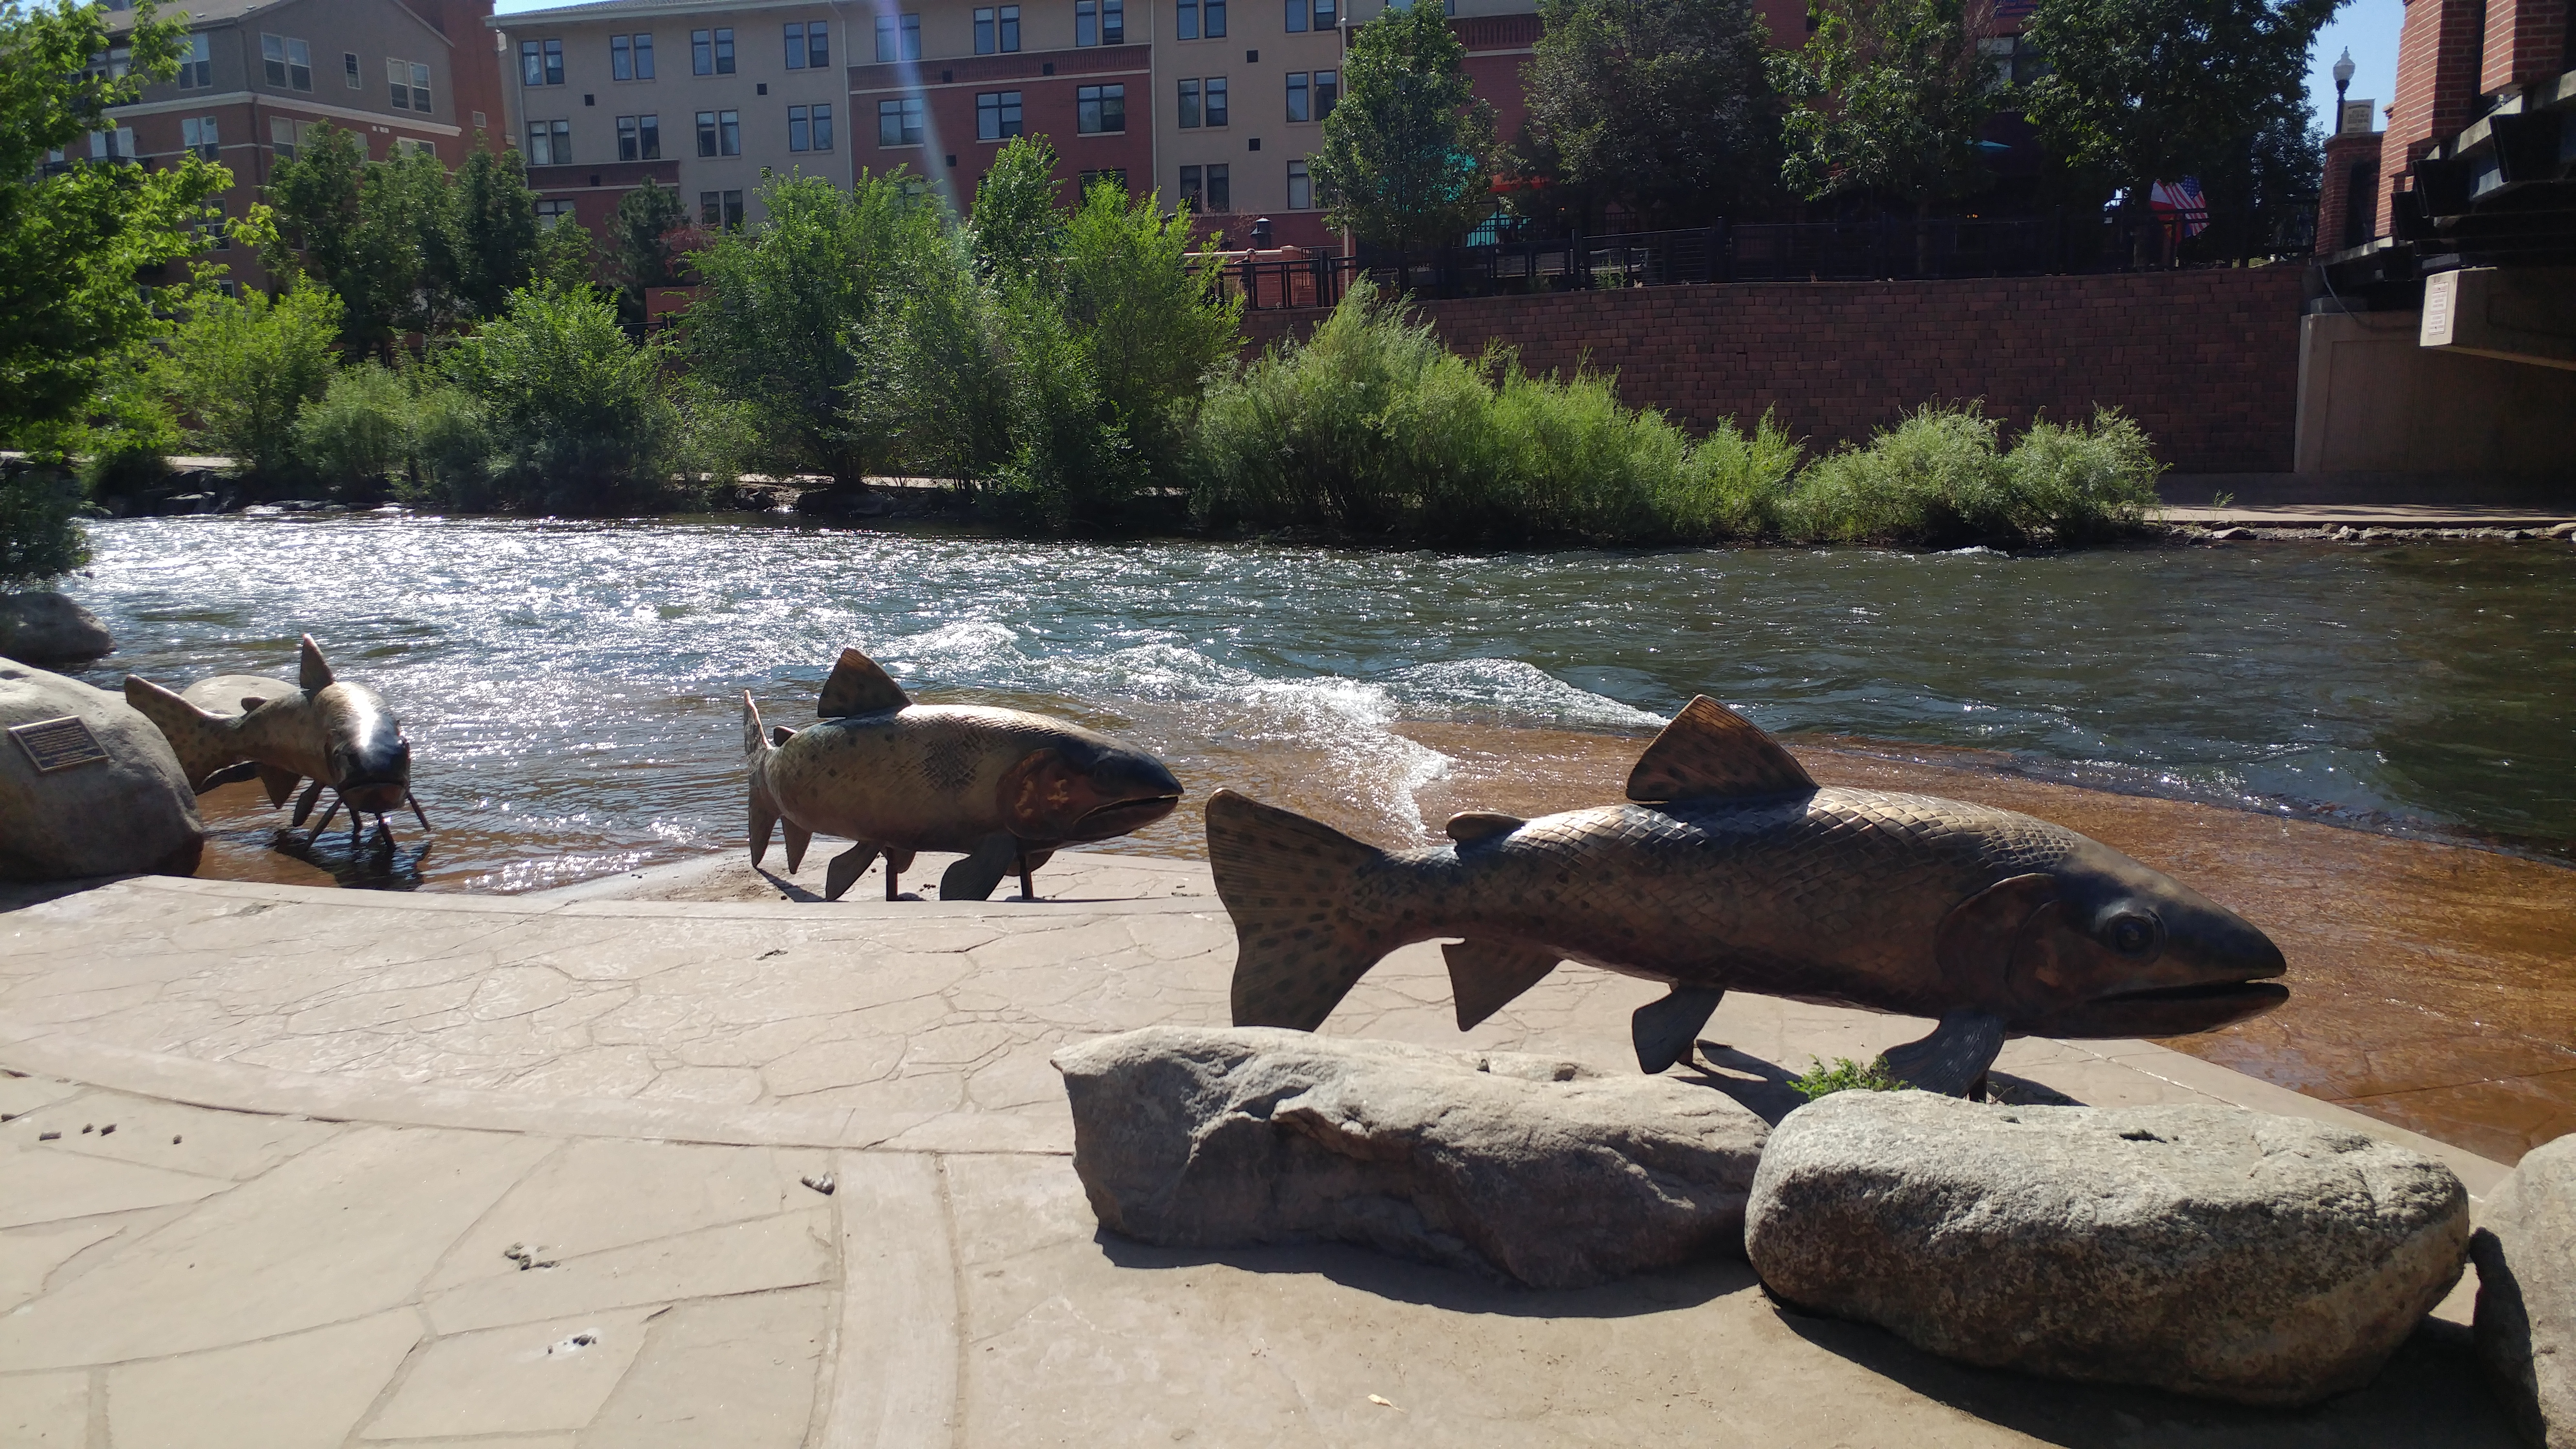 The fish just east of the Washington Avenue Bridge on Clear Creek in Golden. They would be in the water during the peak spring runoff.